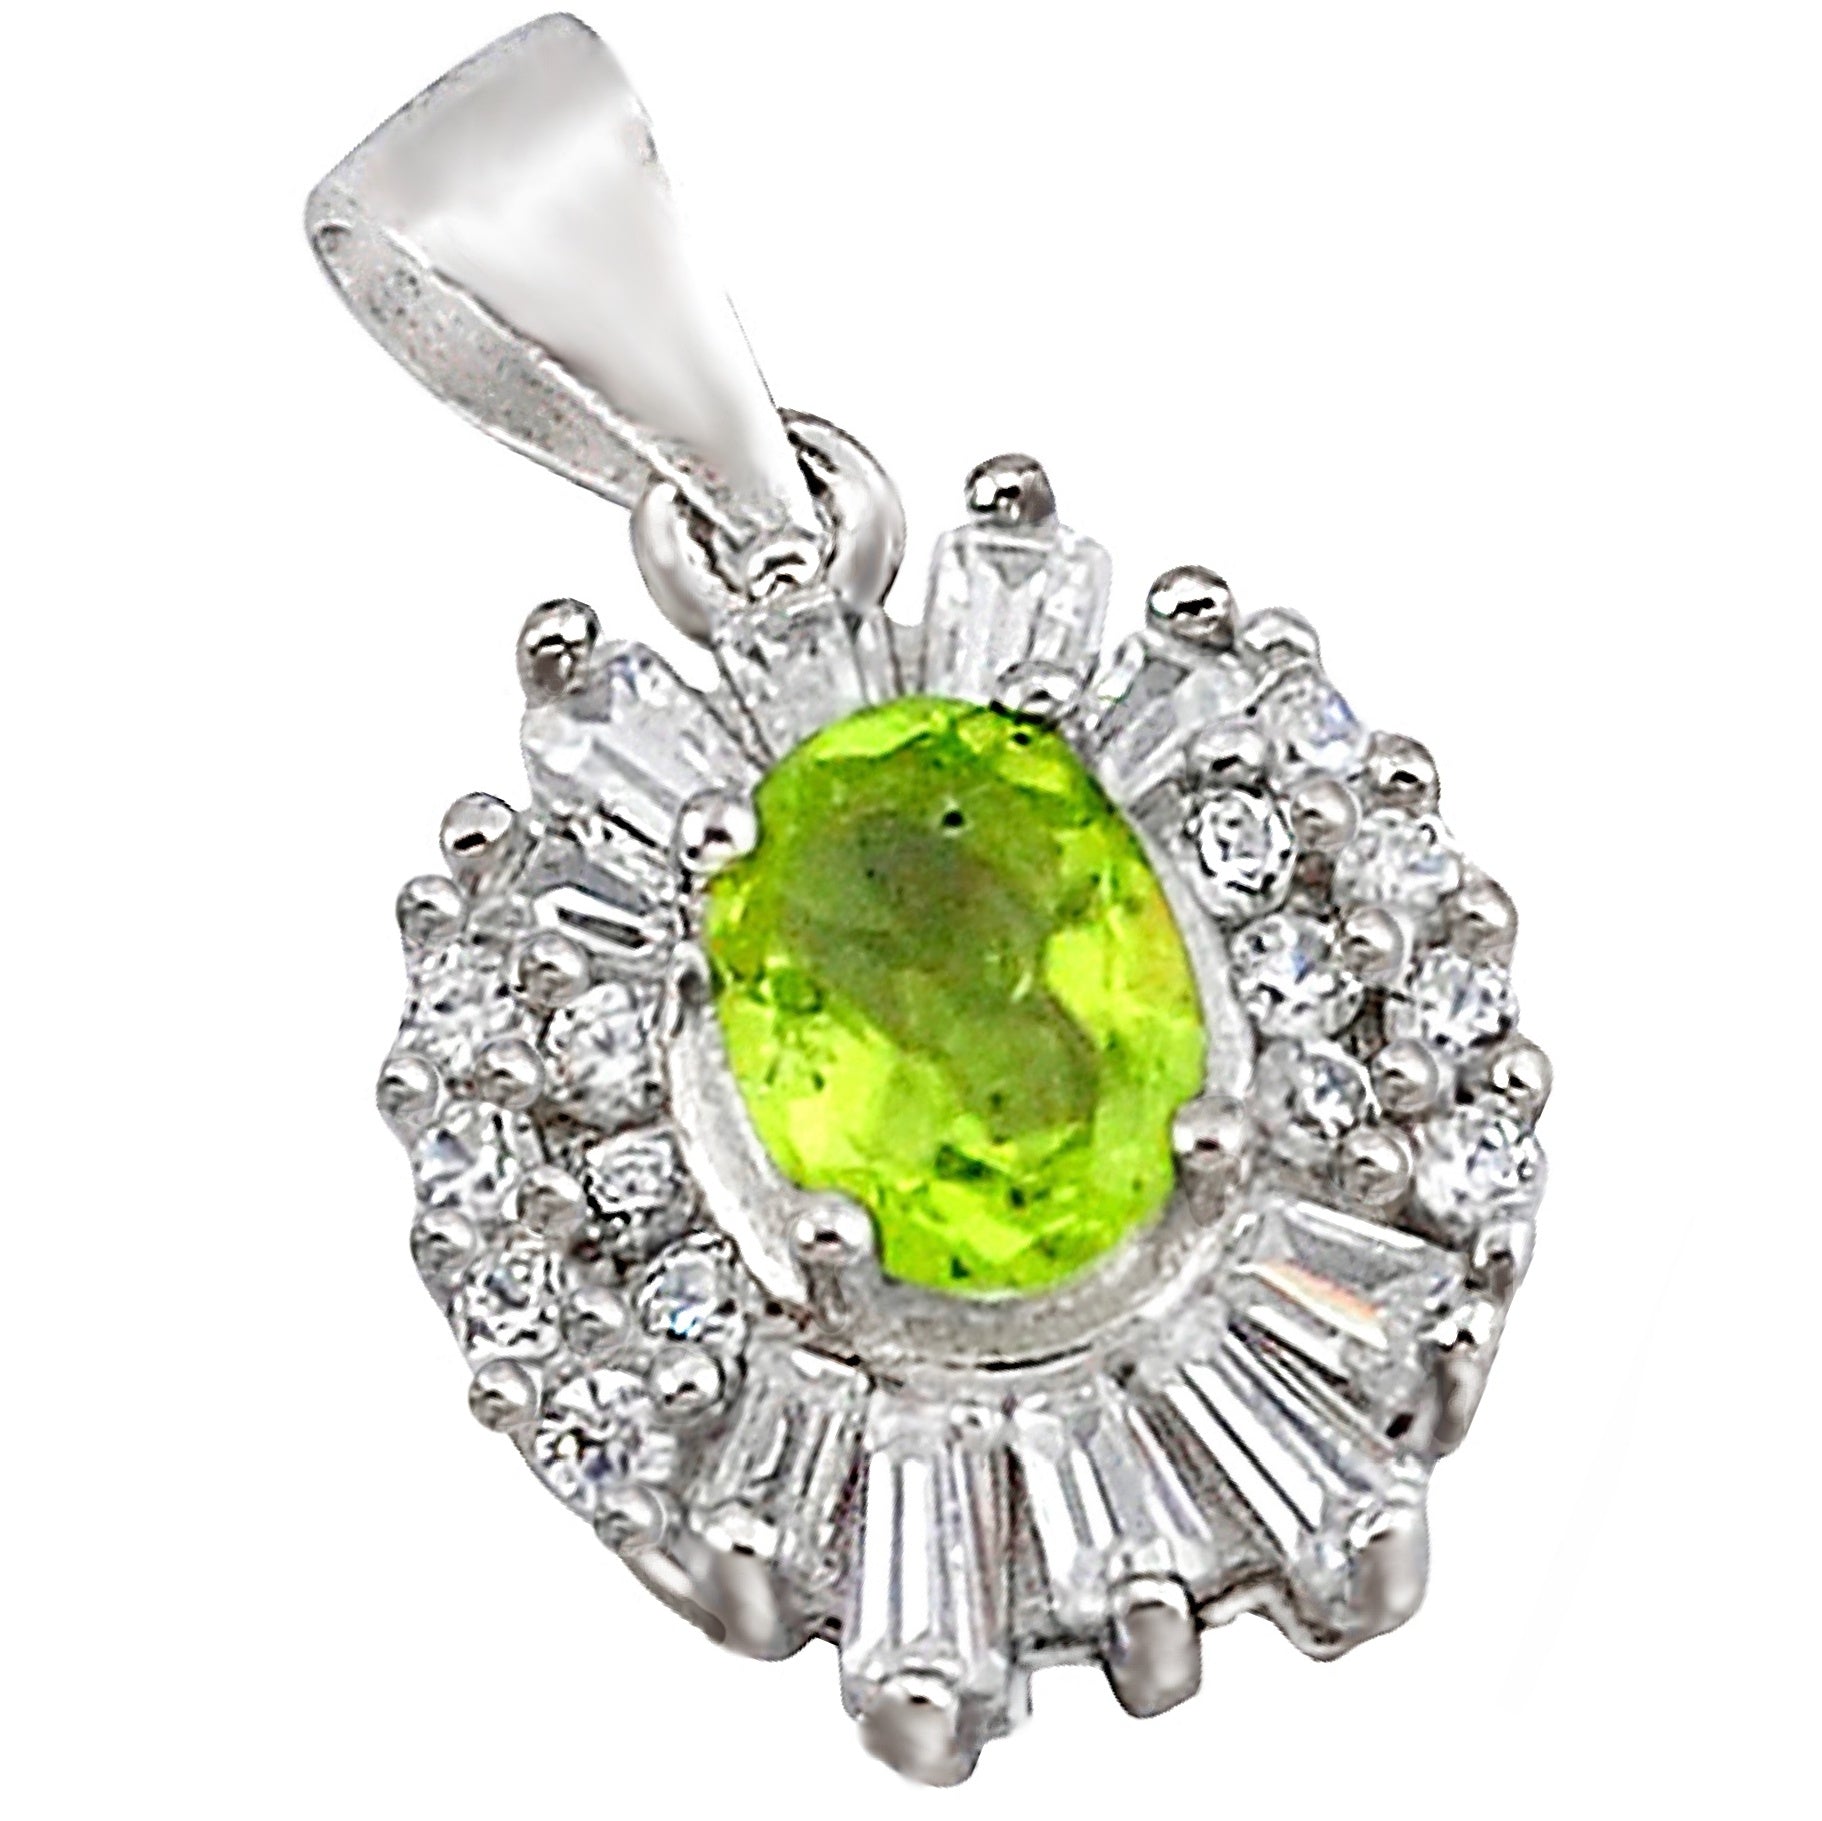 Natural Faceted Peridot and White Topaz Gemstone Solid .925 Sterling Silver Pendant - BELLADONNA